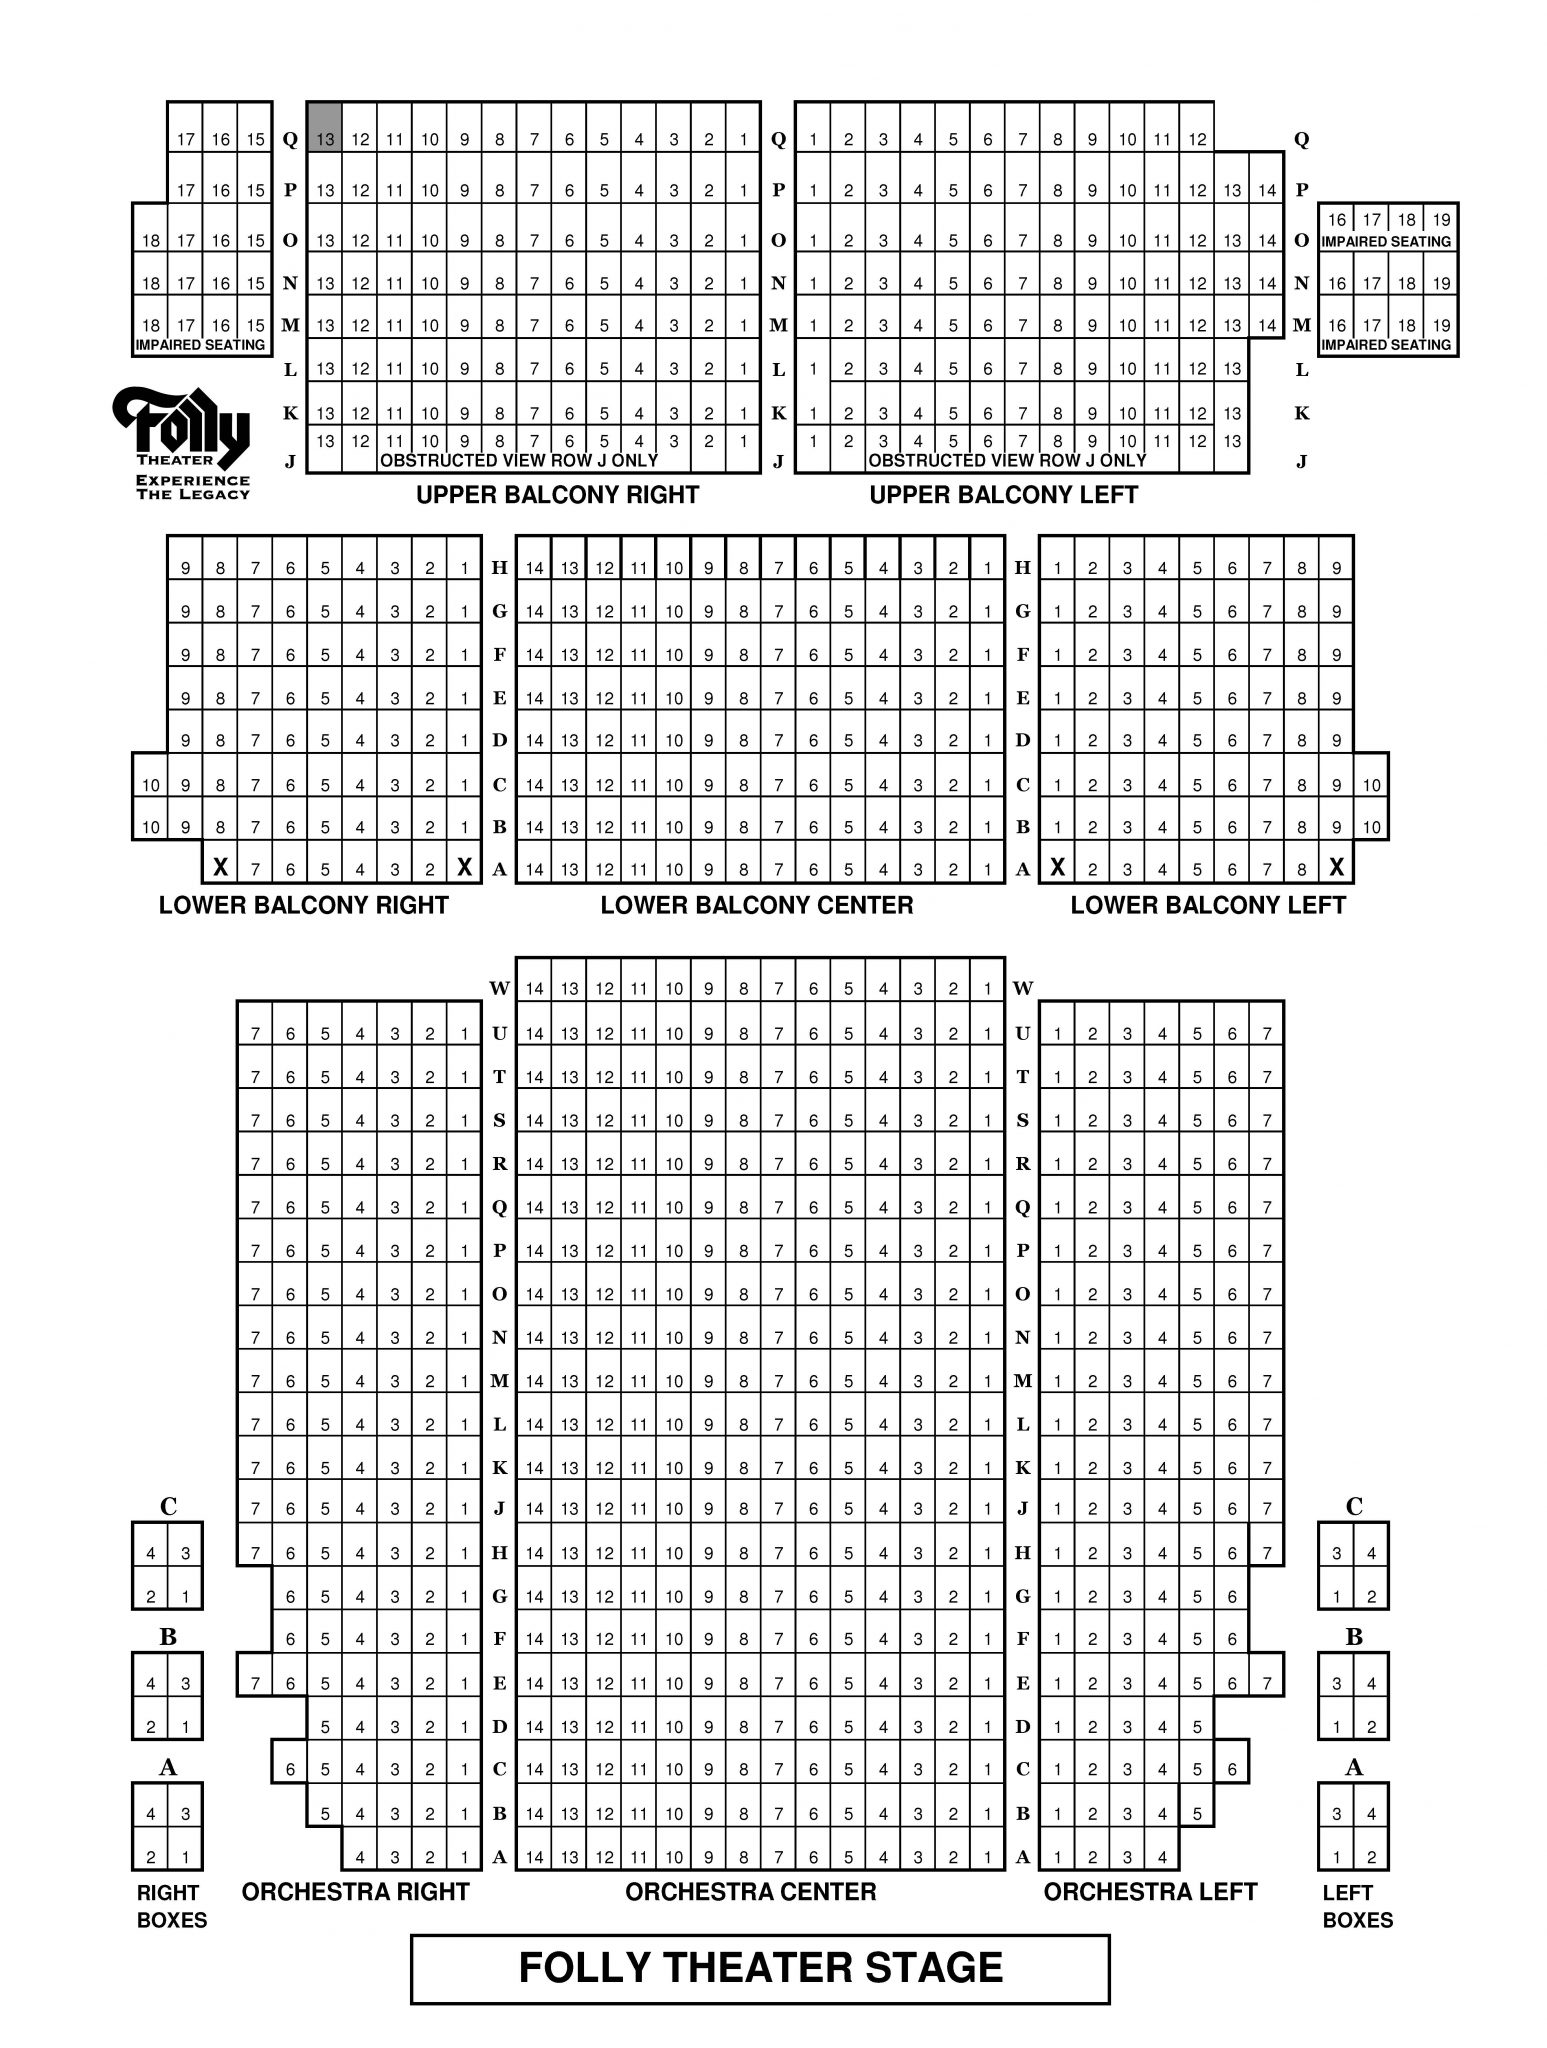 Folly Theater Seating Chart